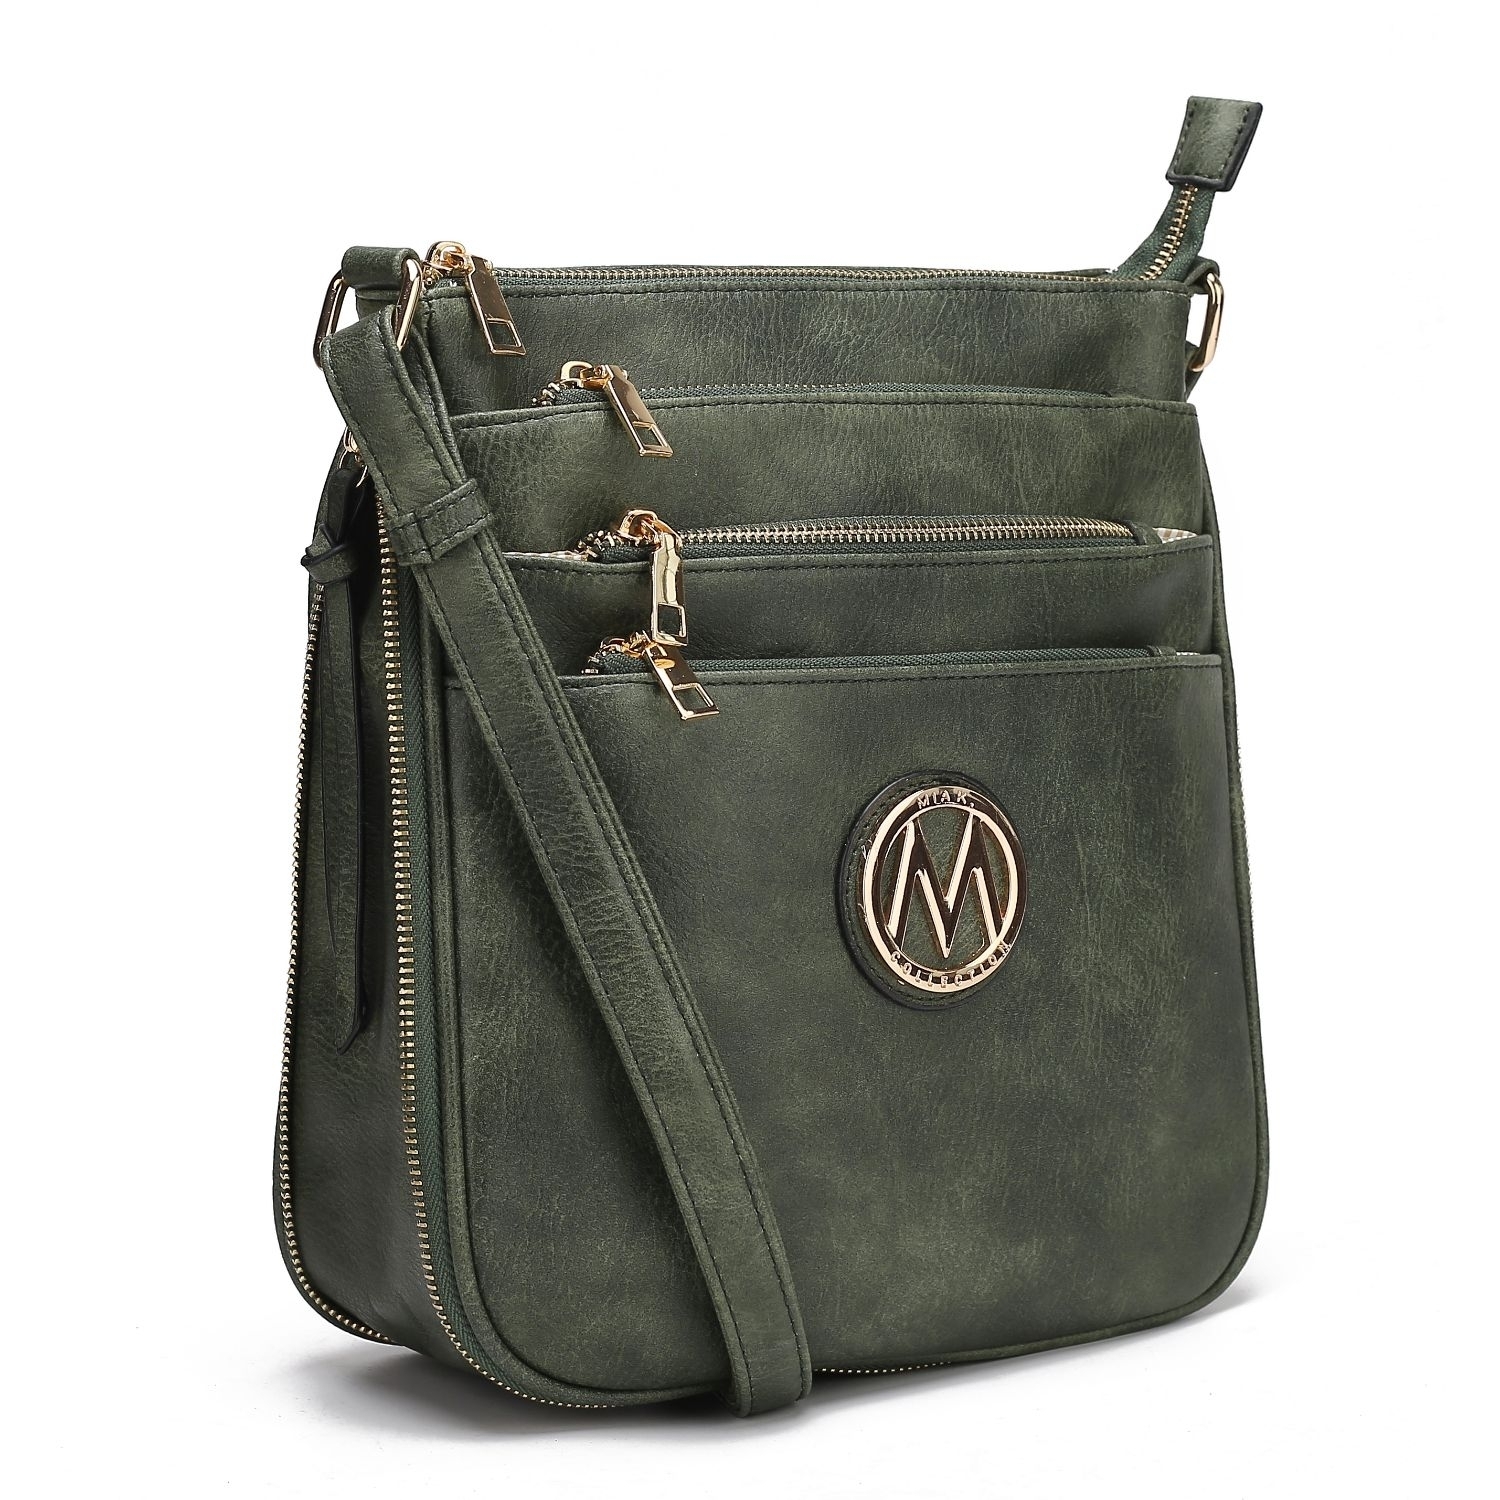 MKF Collection Salome Expandable Multi-Compartment Cross Body By Mia K. Handbag - Olive